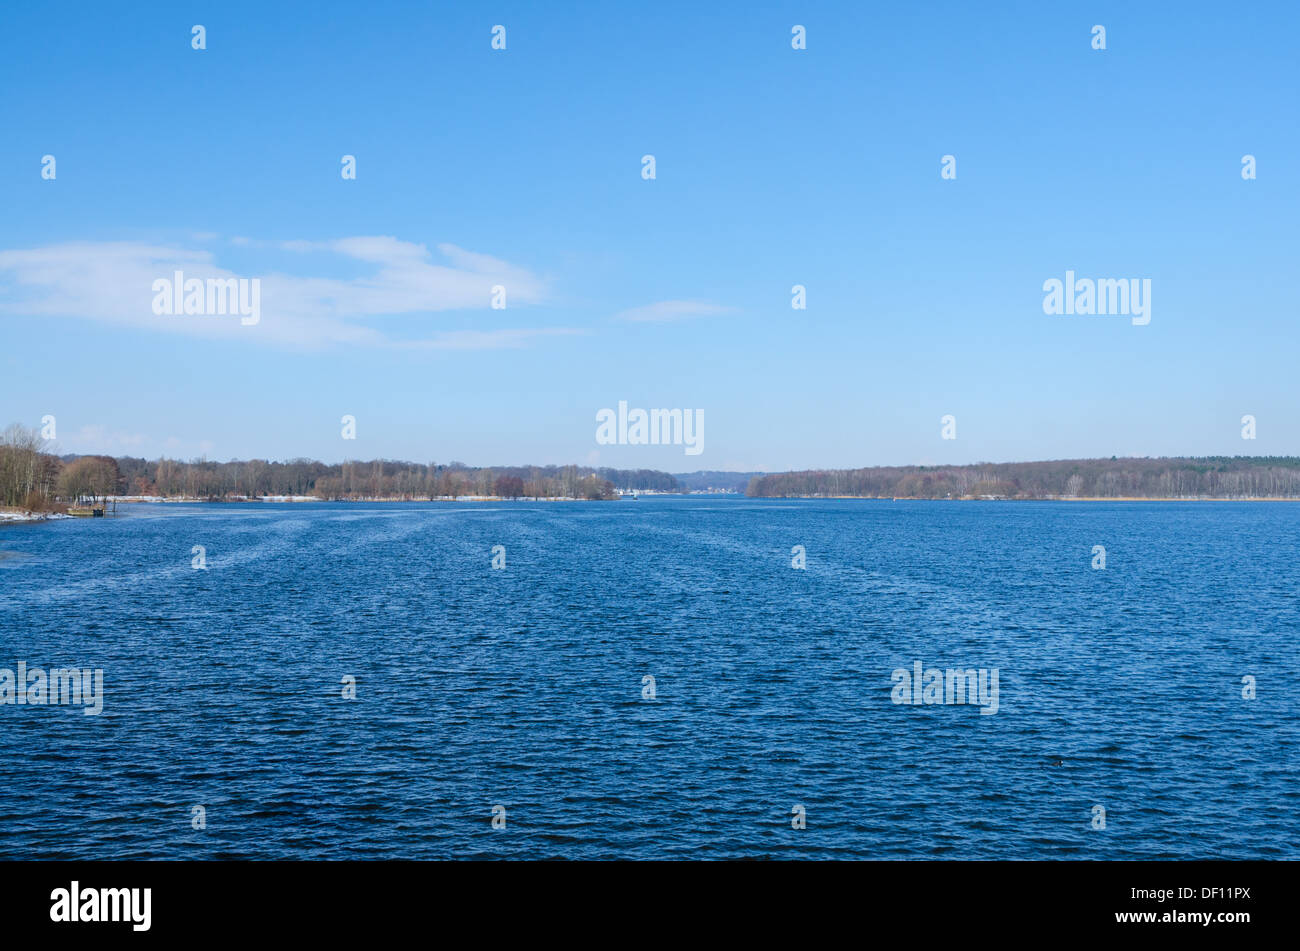 Deep blue water surface of european lake or river and snowy forest on skyline Stock Photo